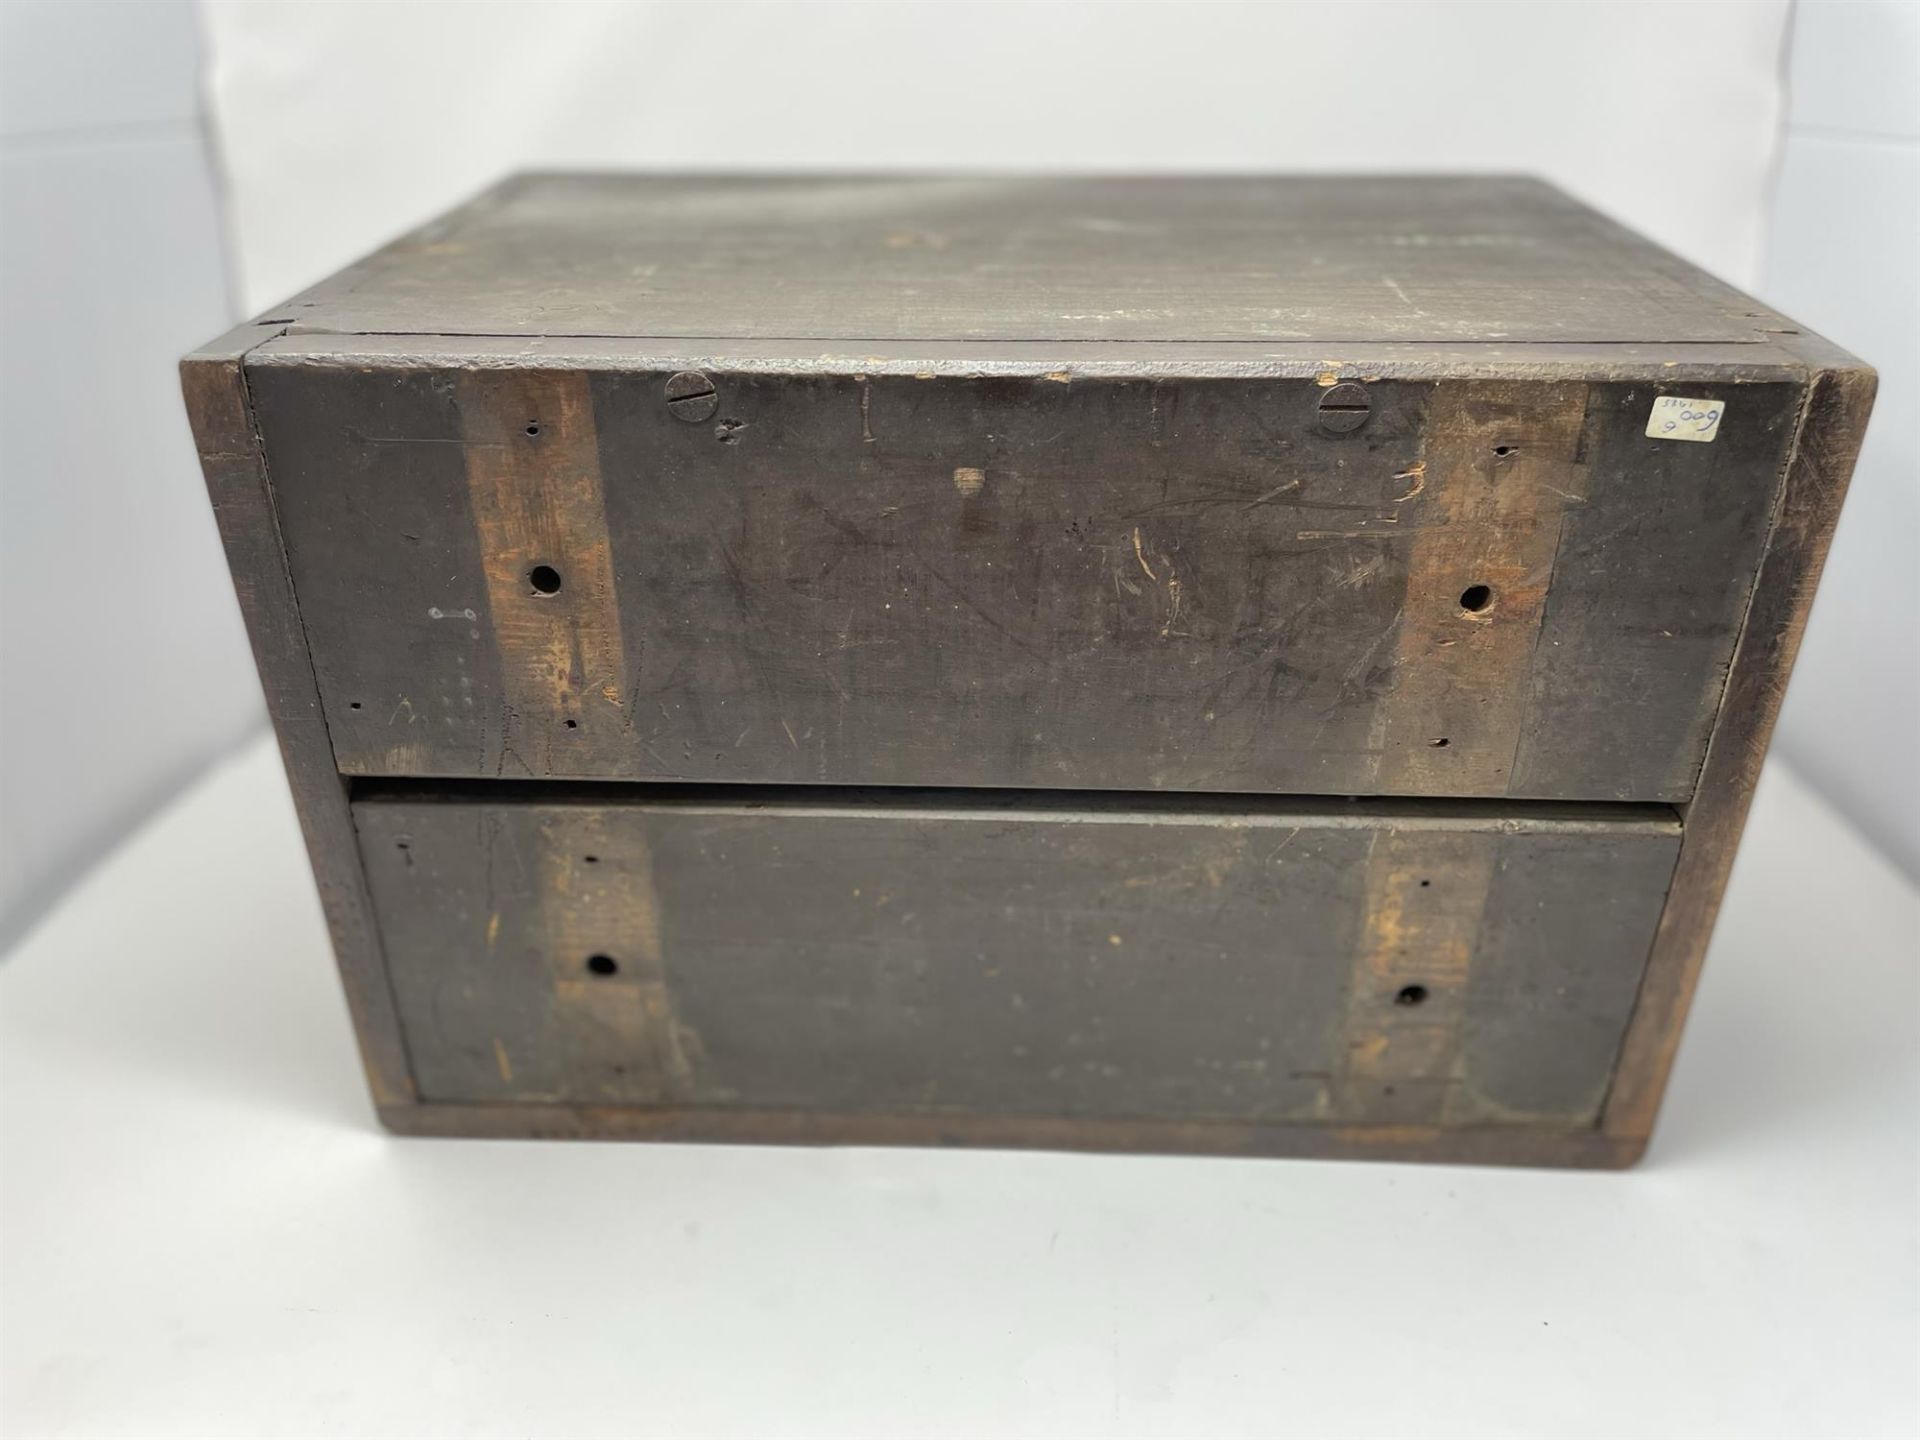 Early Vintage Running Board Box c1920s - Image 5 of 5